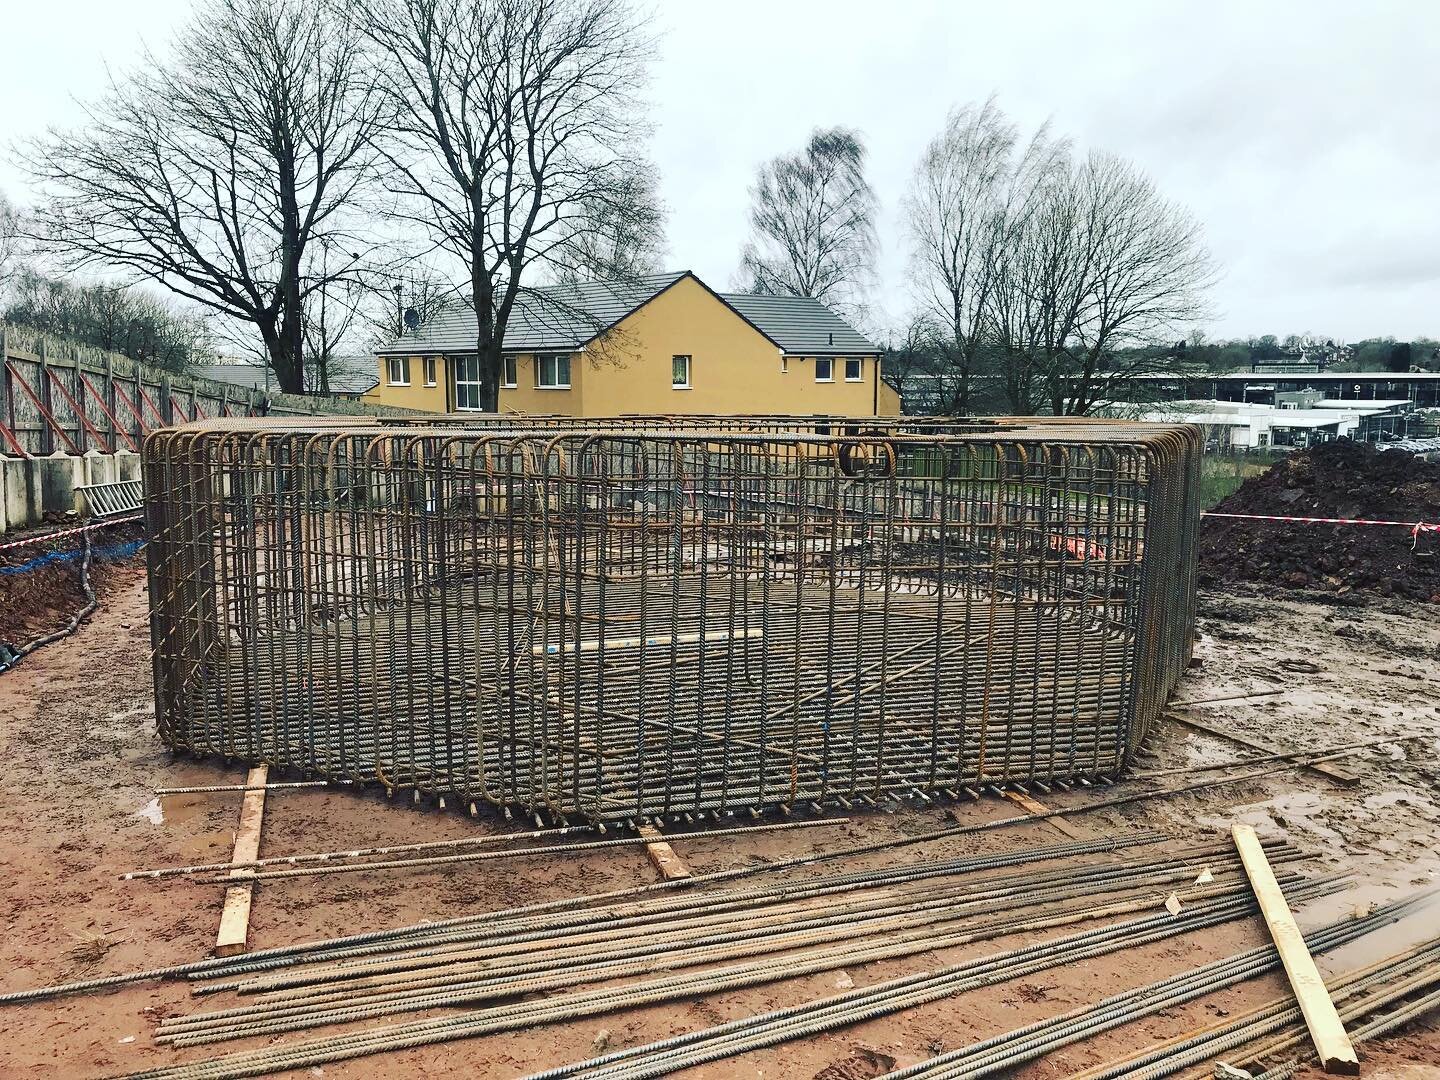 The 7.5m wide reinforcement for the tower crane base at our site in Stockport, TERM&rsquo;s first major project. This will support a 35m tall crane to facilitate to construction of the first two residential blocks on the site, and will be lifted into